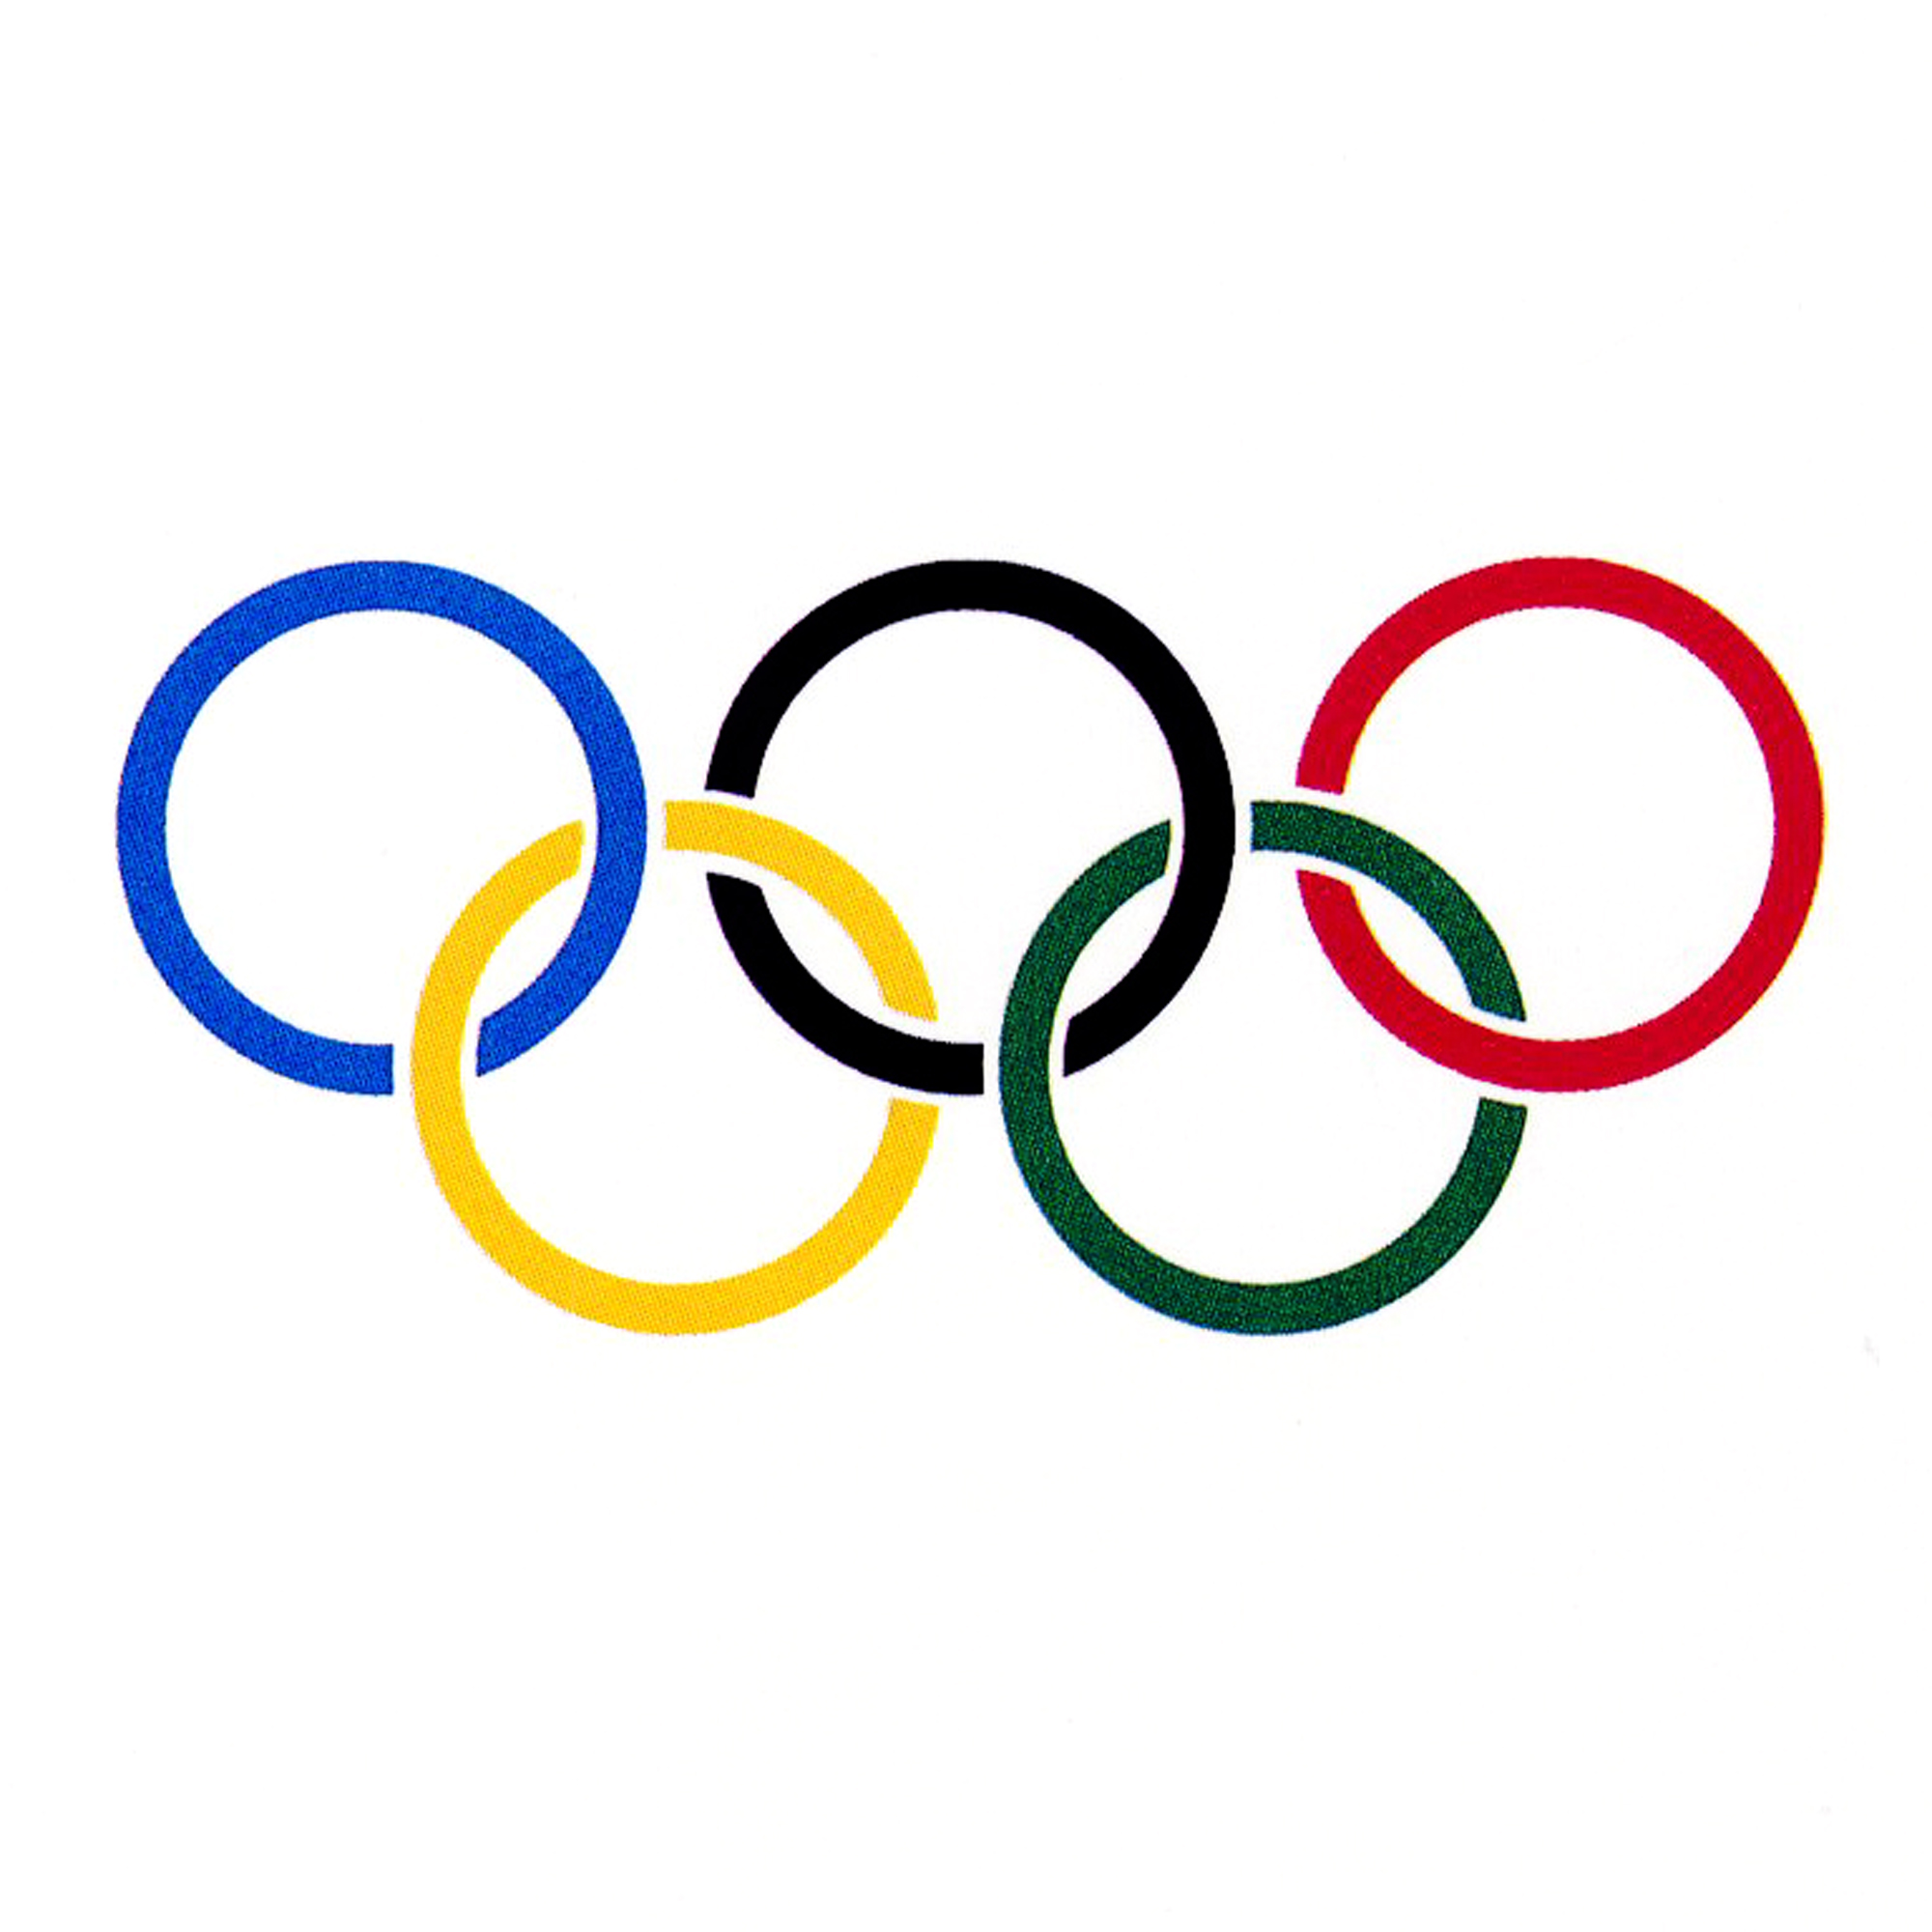 Free Olympics Rings, Download Free Clip Art, Free Clip Art on.